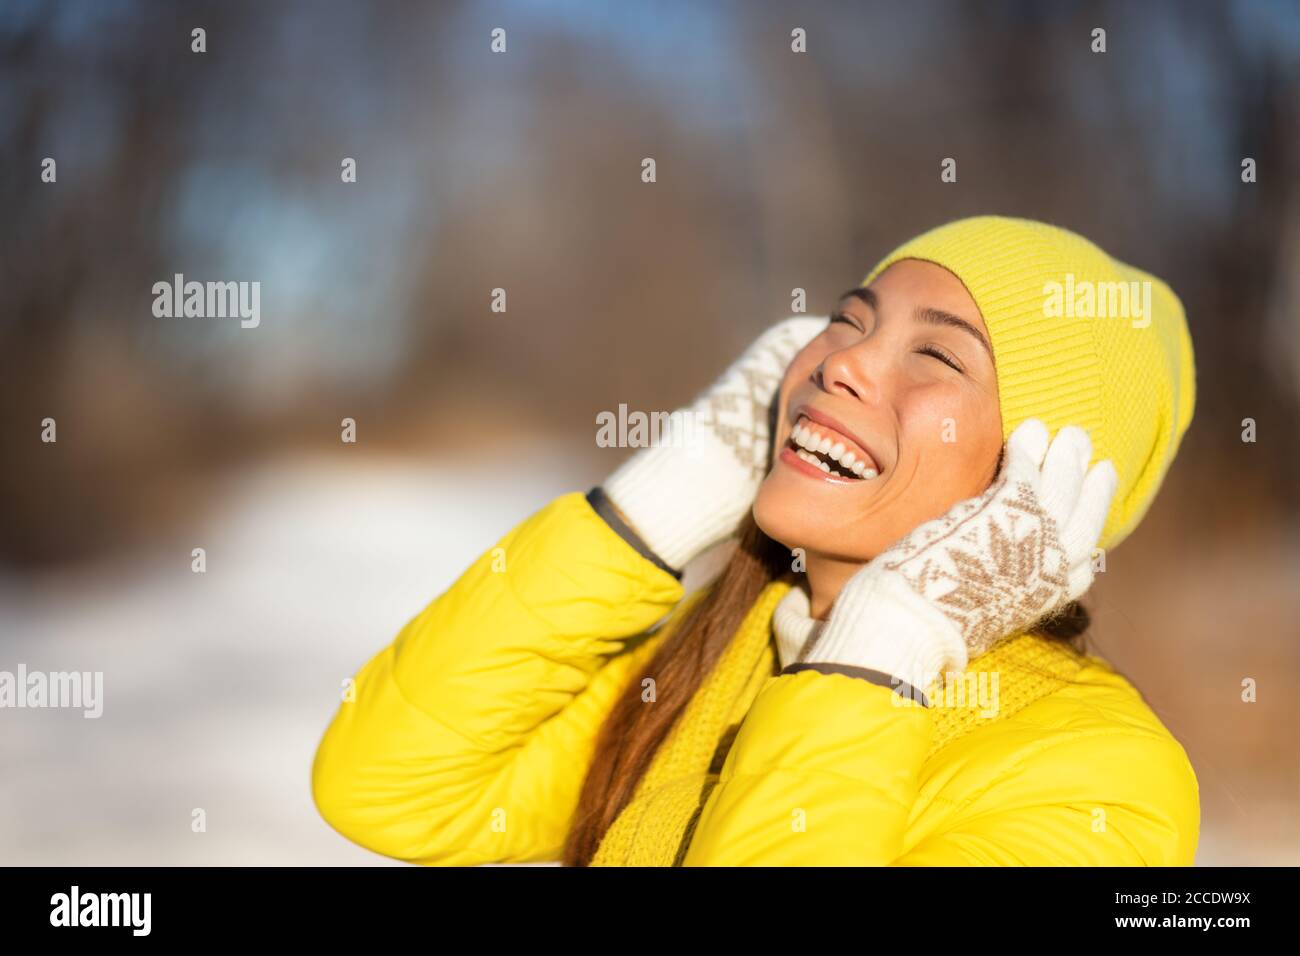 Happy winter woman enjoying cold with yellow hat protecting ears, gloves, coat for frost protection. Asian girl smiling. Stock Photo